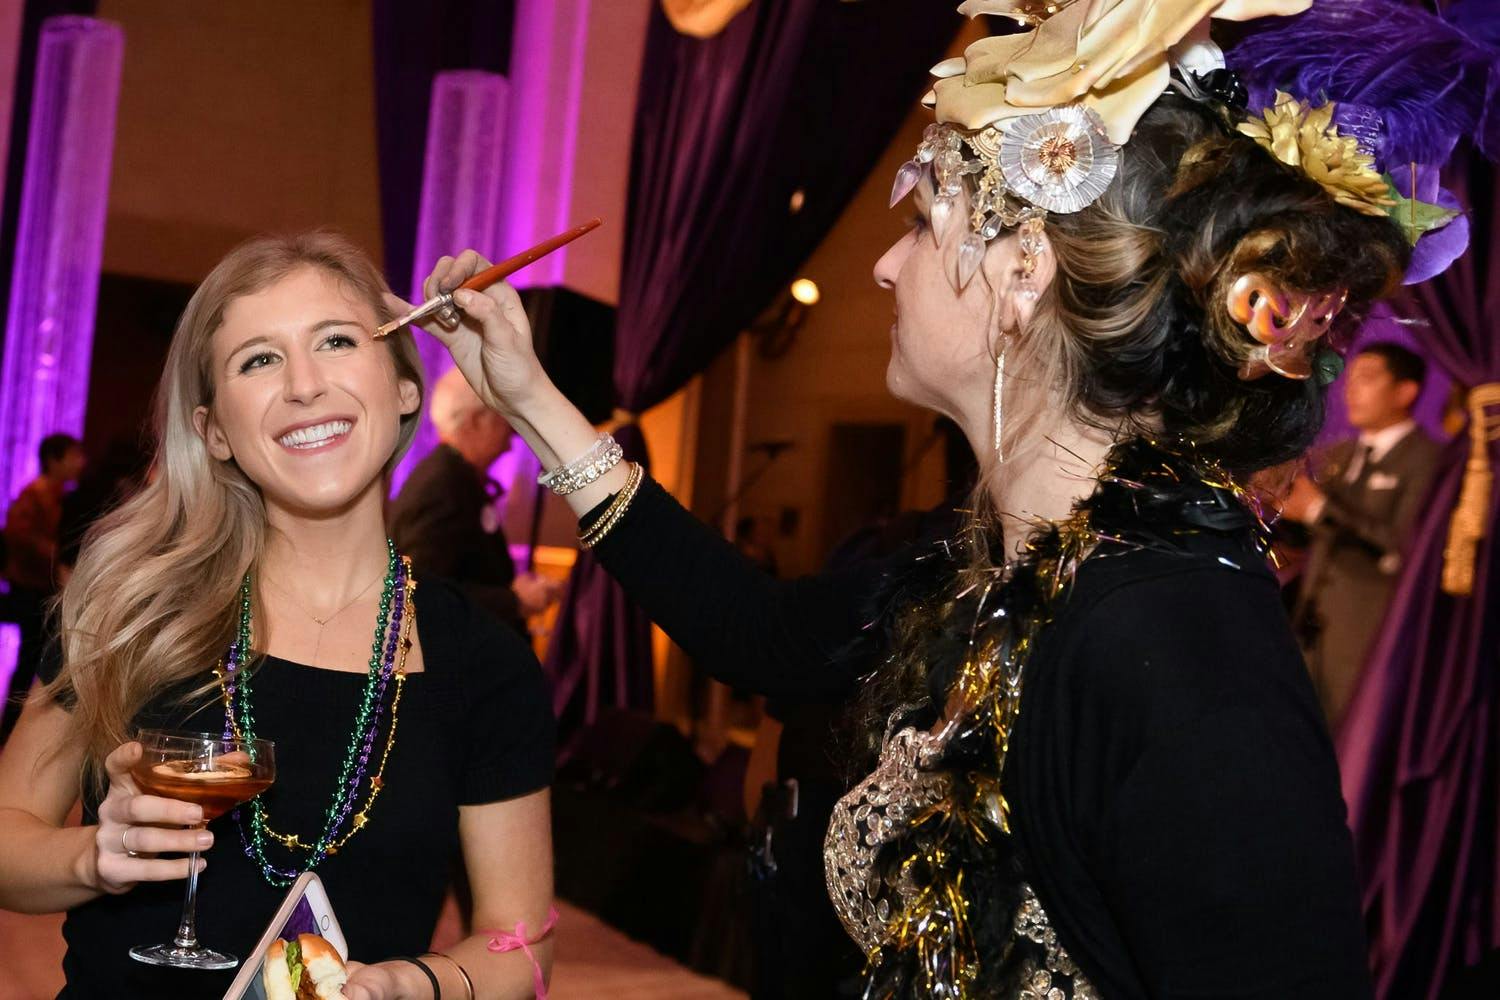 Masked Mardi Gras experiential product launch with live make up artists | PartySlate